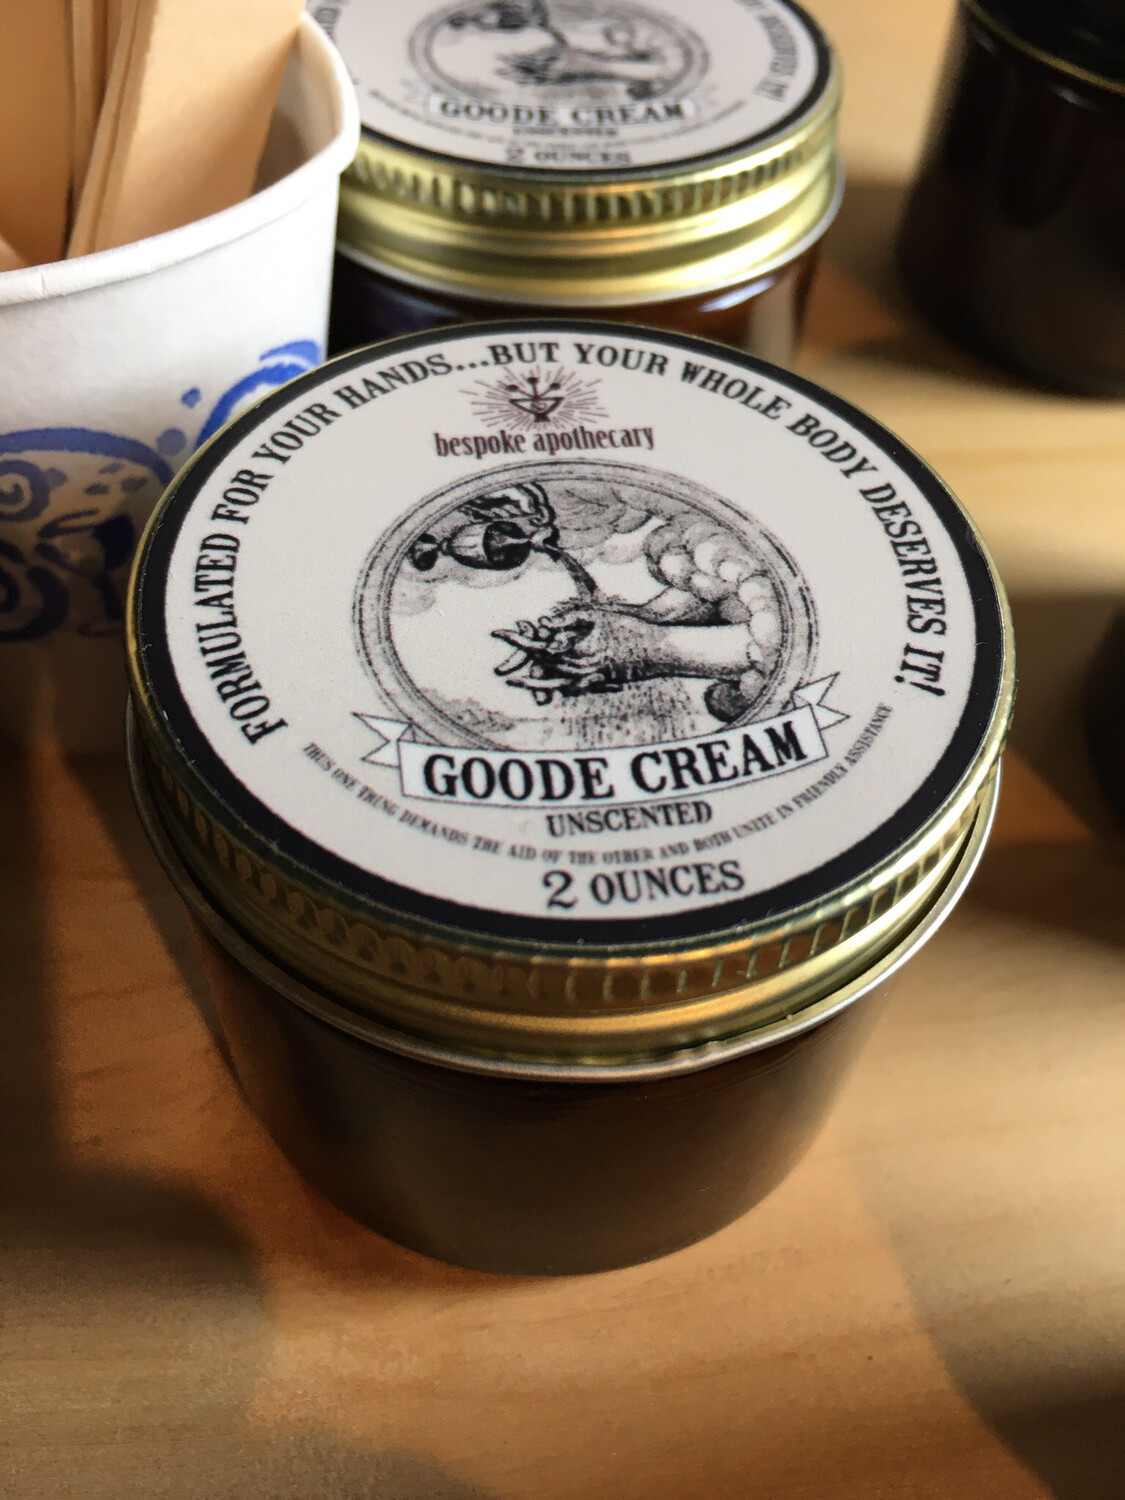 4 oz. GOODE Cream - formulated for your hands but your whole body deserves it!